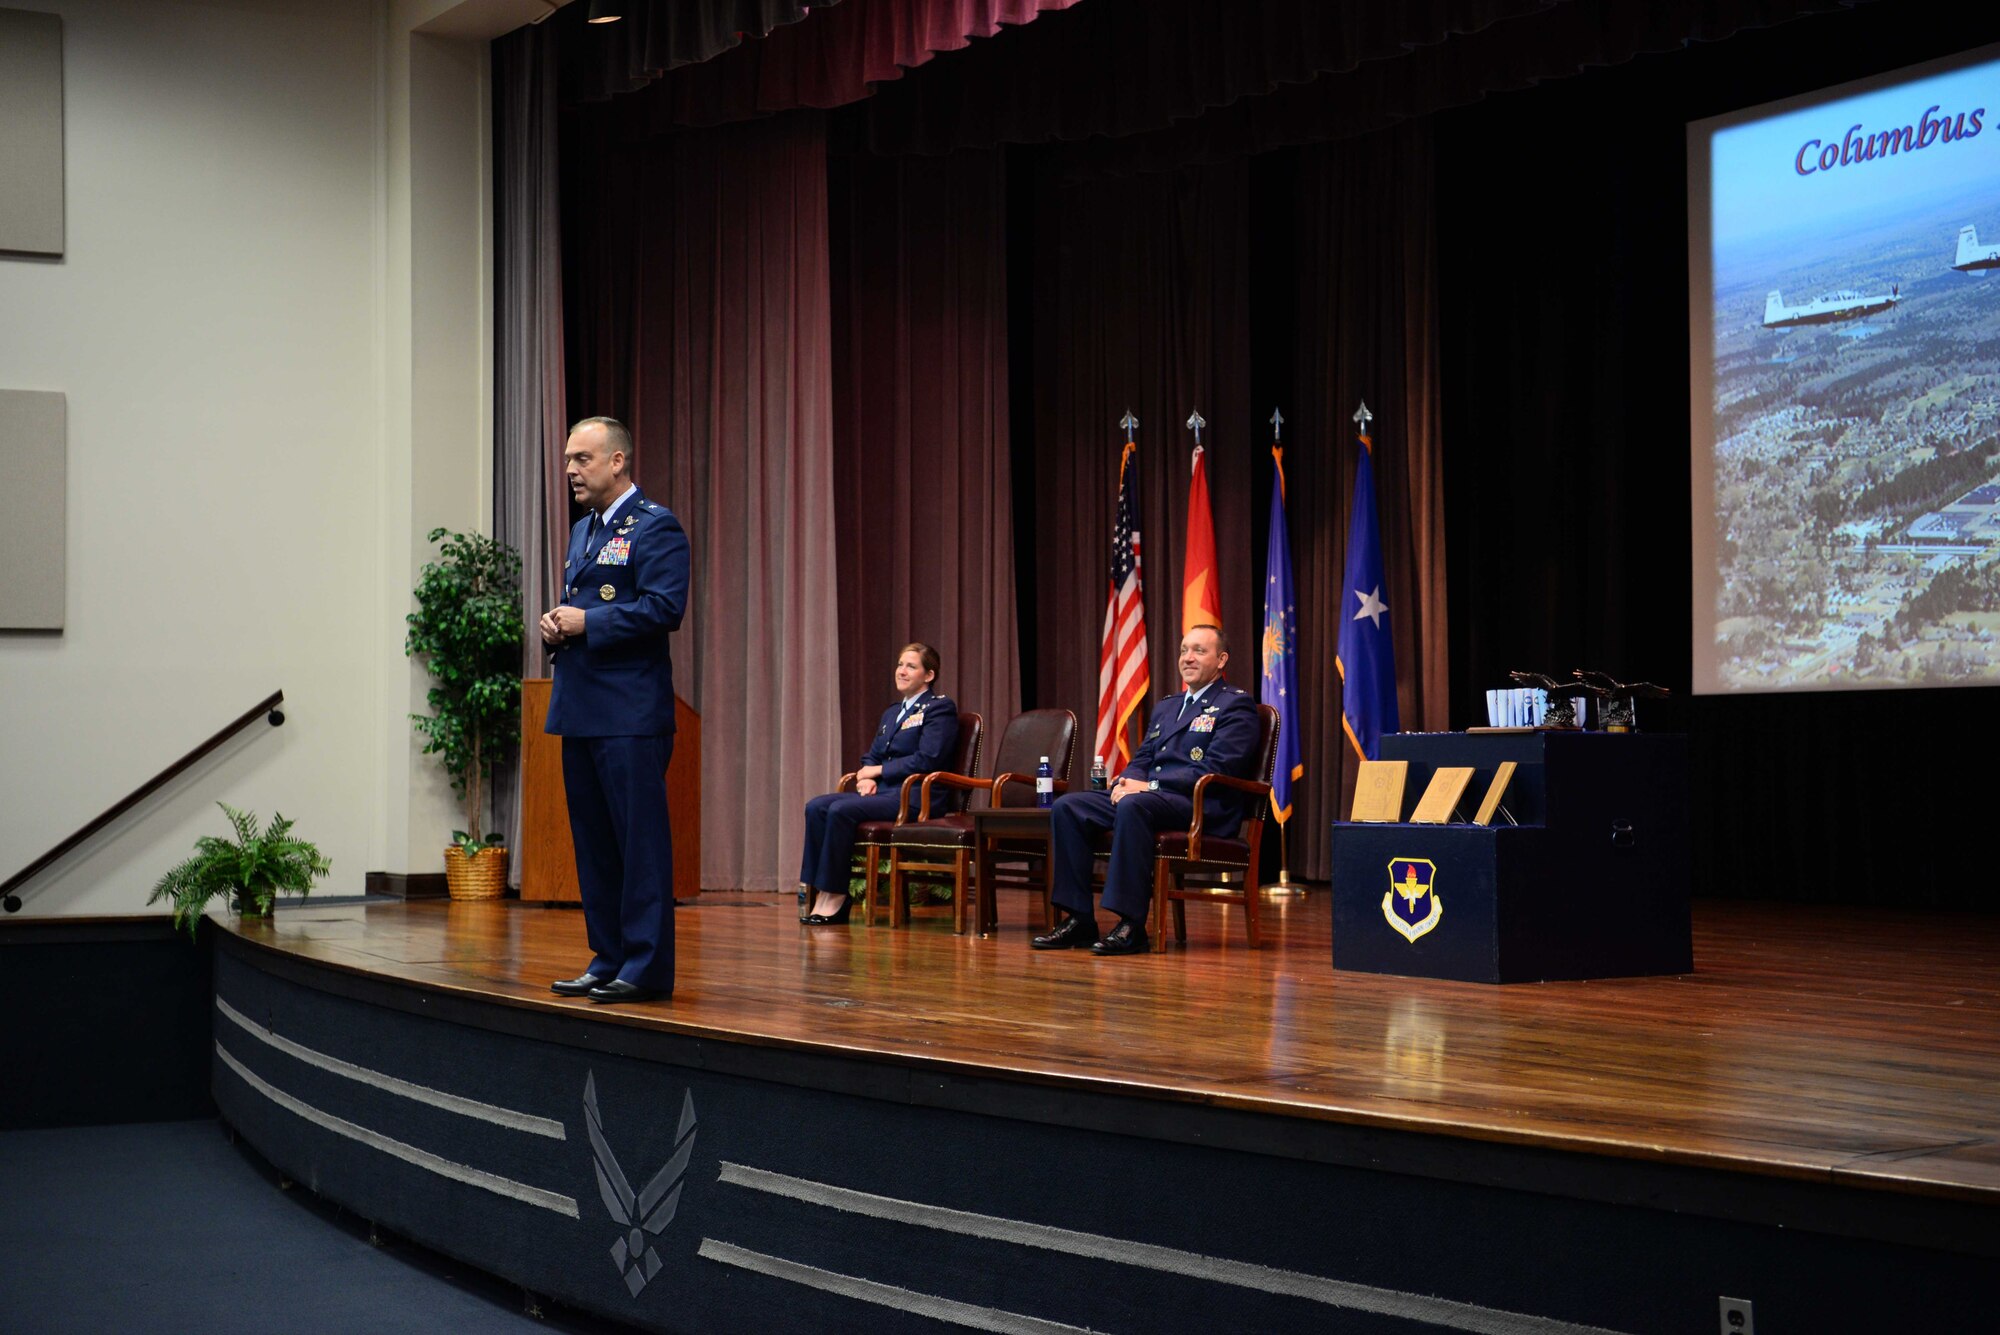 Brig. Gen. Edward Vaughan, Special Assistant to the Director of Training and Readiness, Deputy Chief of Staff for Operations, speaks at the Kaye Auditorium to celebrate the graduation of class 19-10/16 May 31, 2019, on Columbus Air Force Base, Miss. As the pilots get ready to embark on their first assignment they receive a guest speaker at their graduation to send them off with confidence. (U.S. Air Force photo by Airman 1st Class Jake Jacobsen)